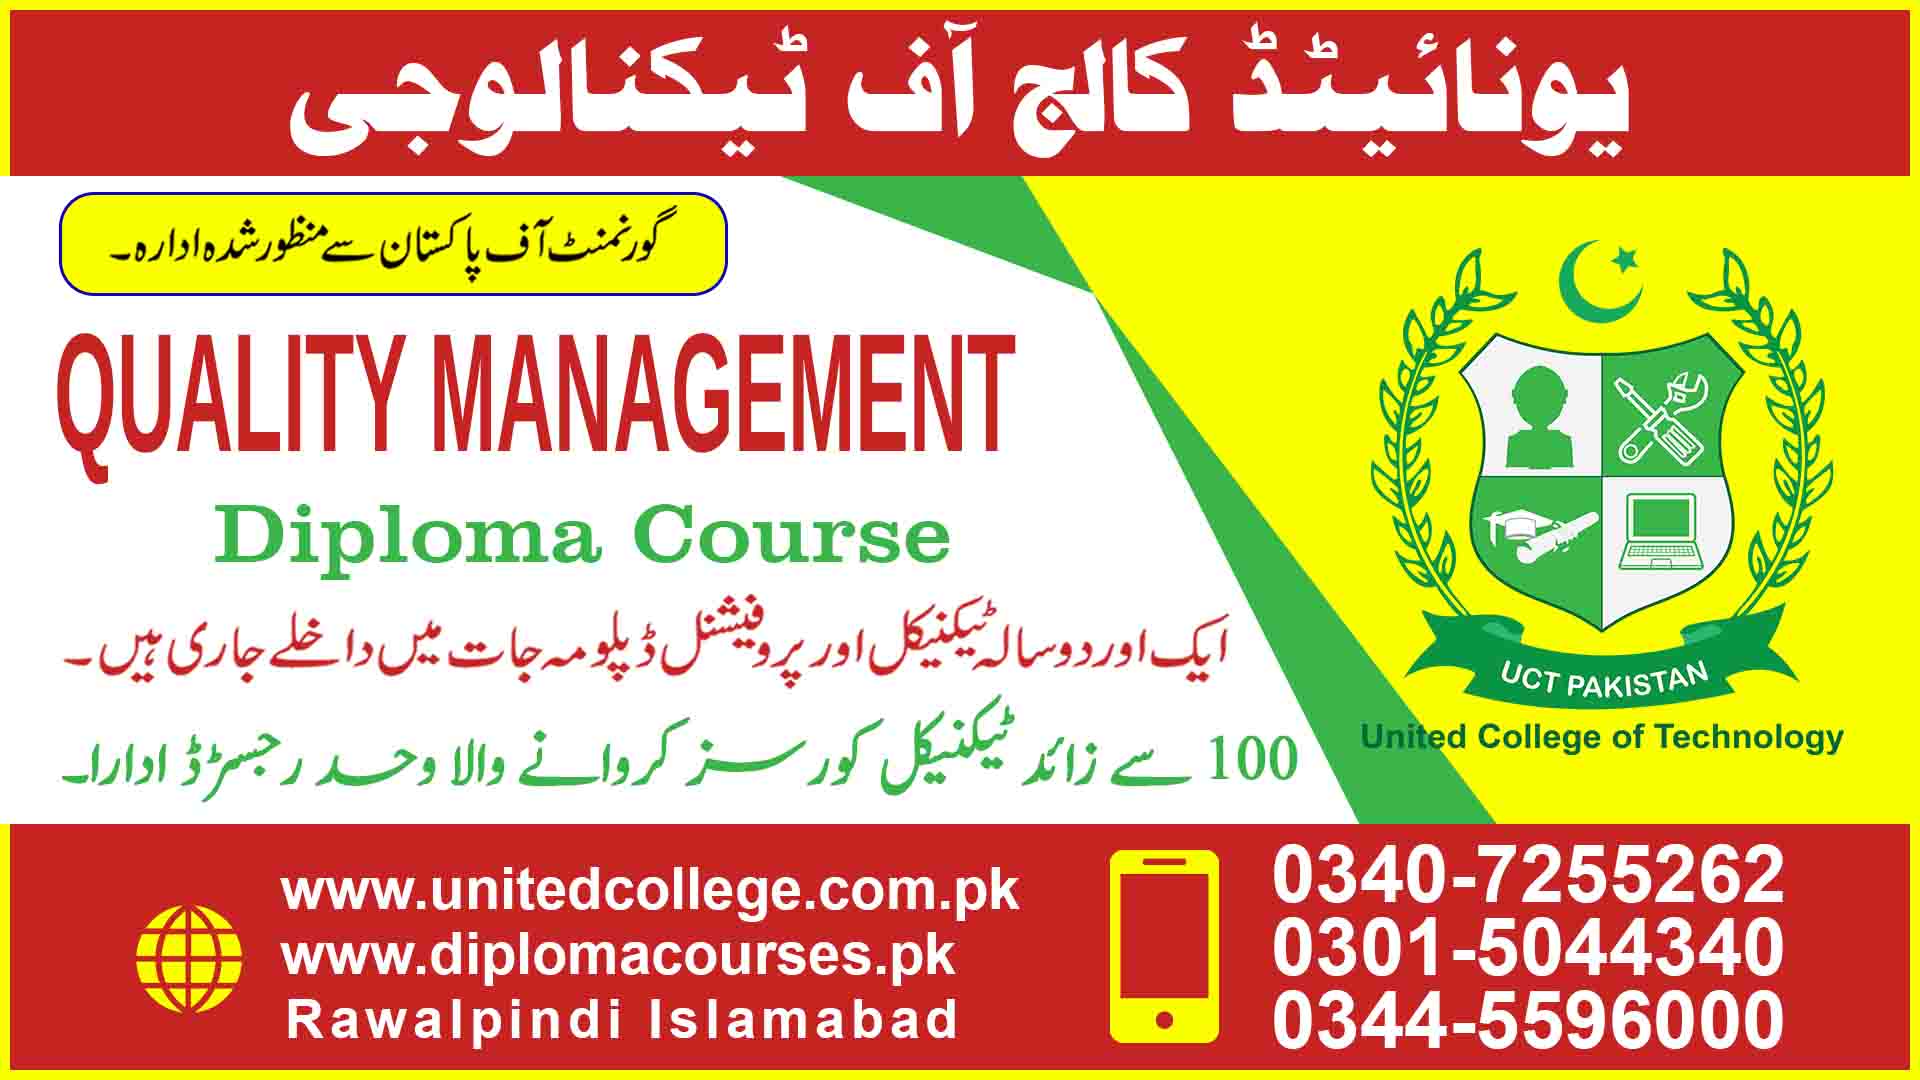 QUALITY MANAGEMENT SYSTEM COURSE IN RAWALPINDI ISLAMABAD PAKISTAN